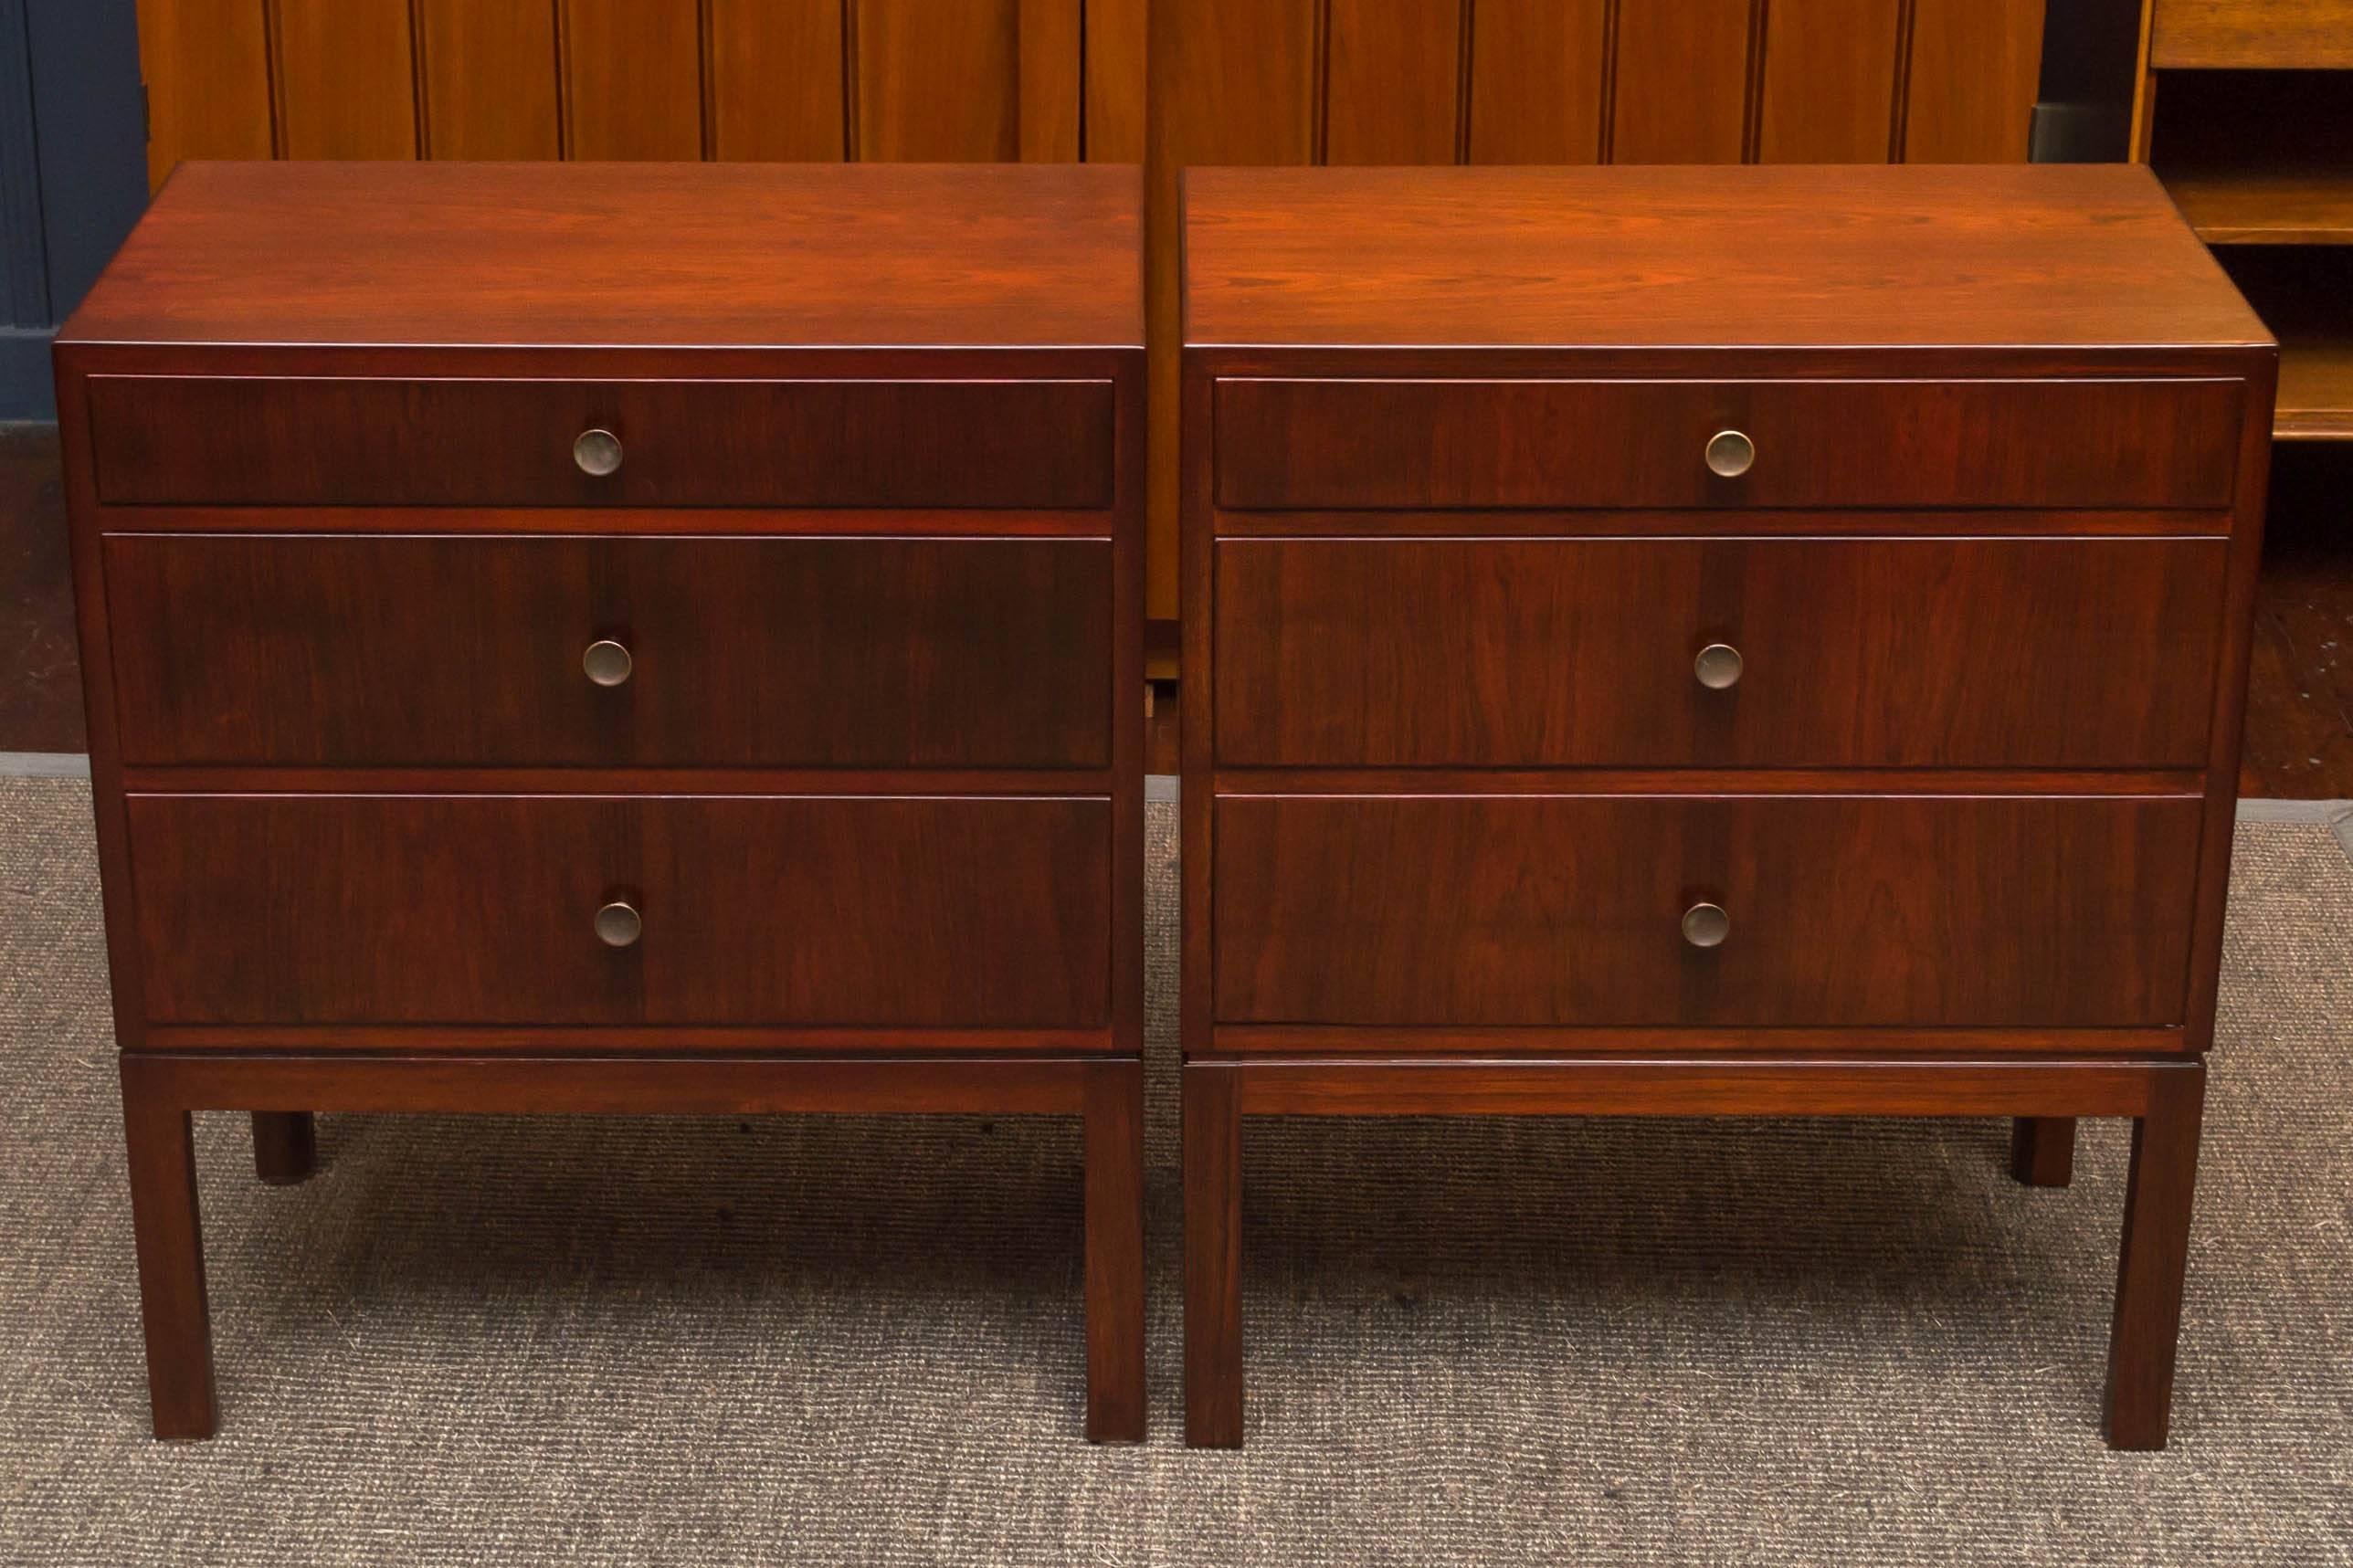 Rare pair of high quality rosewood side tables or nightstands by Thorald Madsens for Snedkeri, Denmark. 
Perfectly refinished and ideal for either end tables or nightstands, finished on the back so they can float in a room.